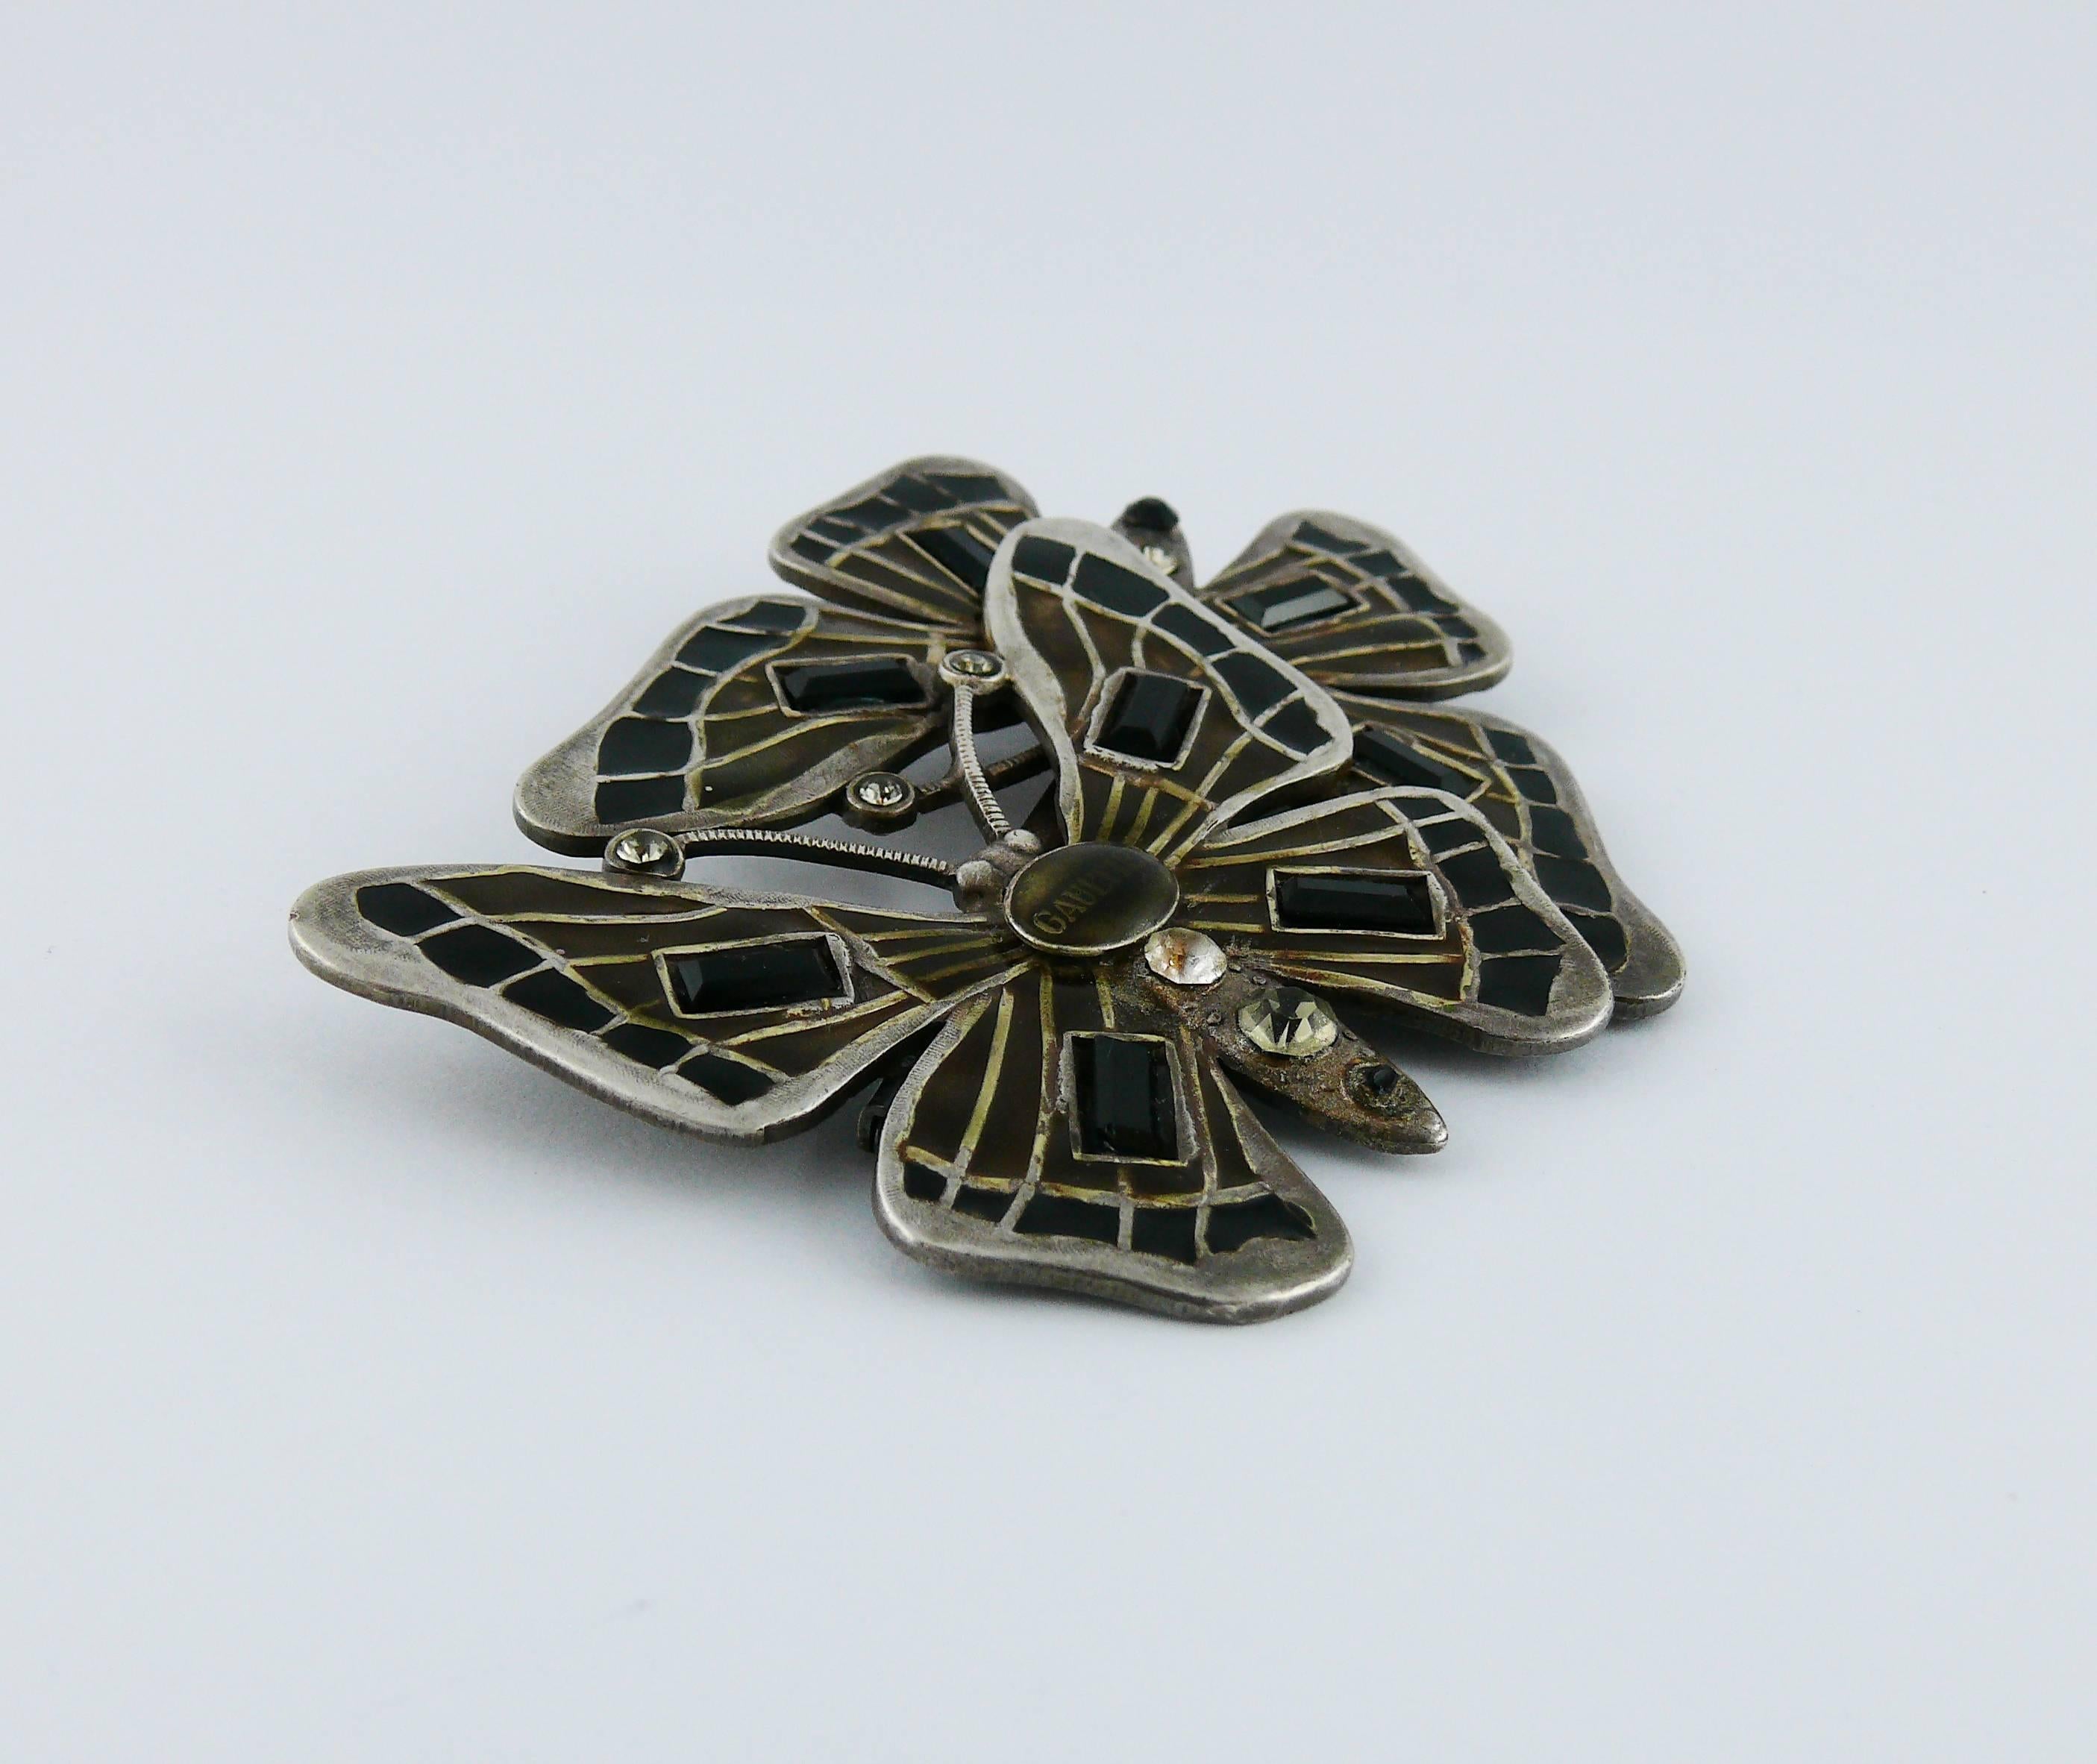 JEAN PAUL GAULTIER vintage enameled butterfly brooch with crystal embellishement.

Marked GAULTIER.

Indicative measurements : max. length approx. 5.5 cm (2.17 inches) / max. width approx. 7.3 cm (2.87 inches).

JEWELRY CONDITION CHART
- New or